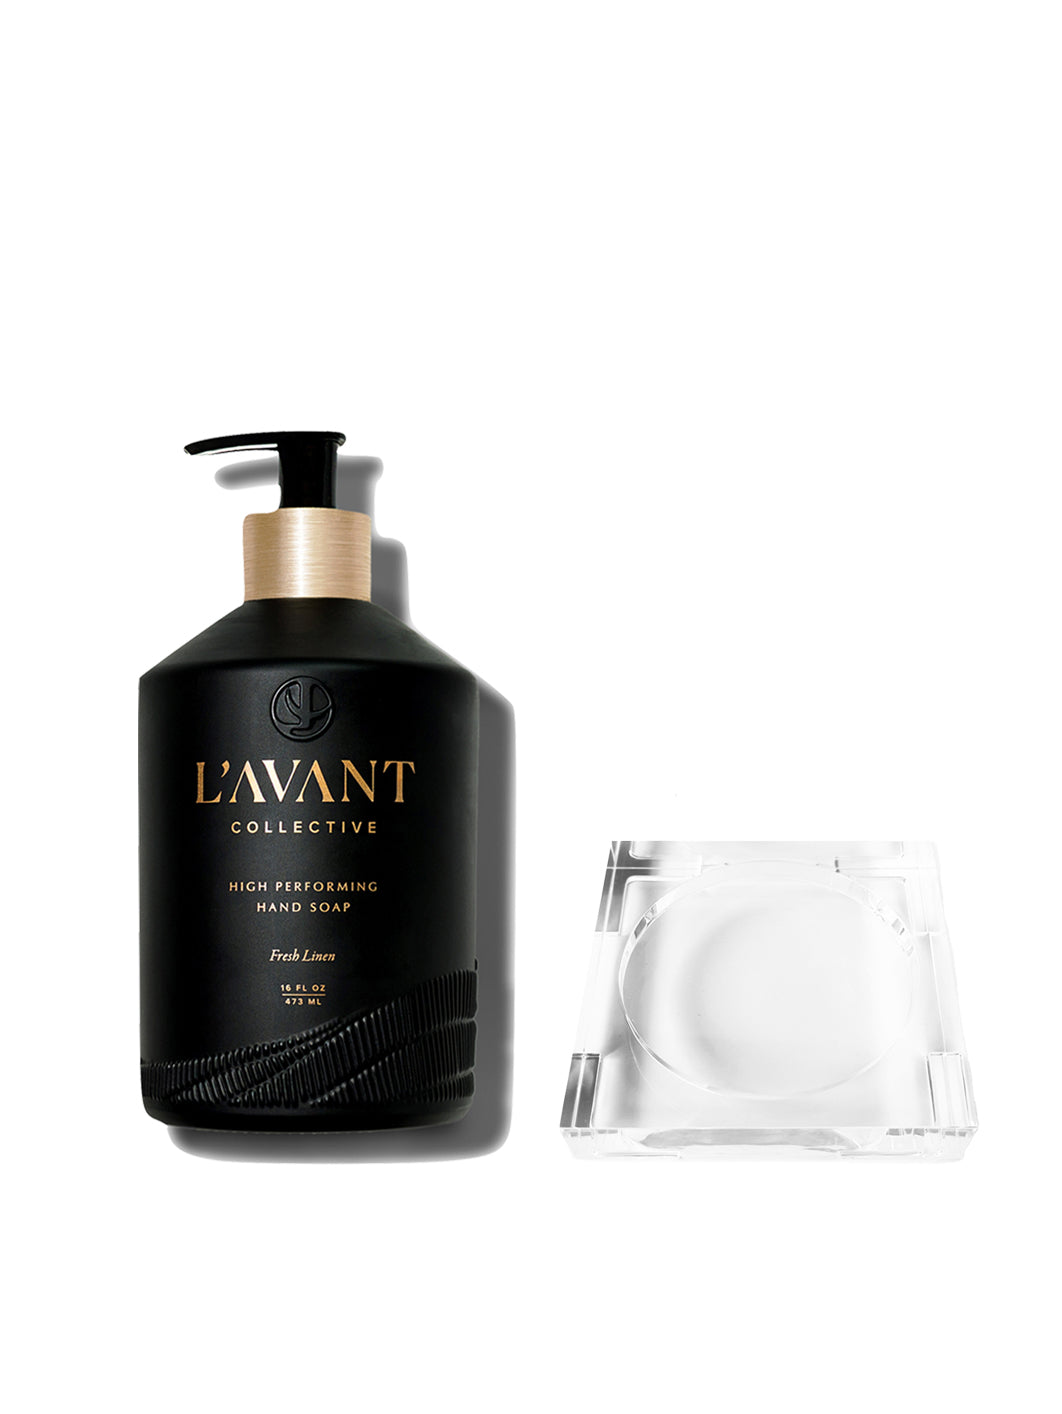 16oz plant-based hand soap in black glass bottle with custom small lucite tray size 4x2x1 inches